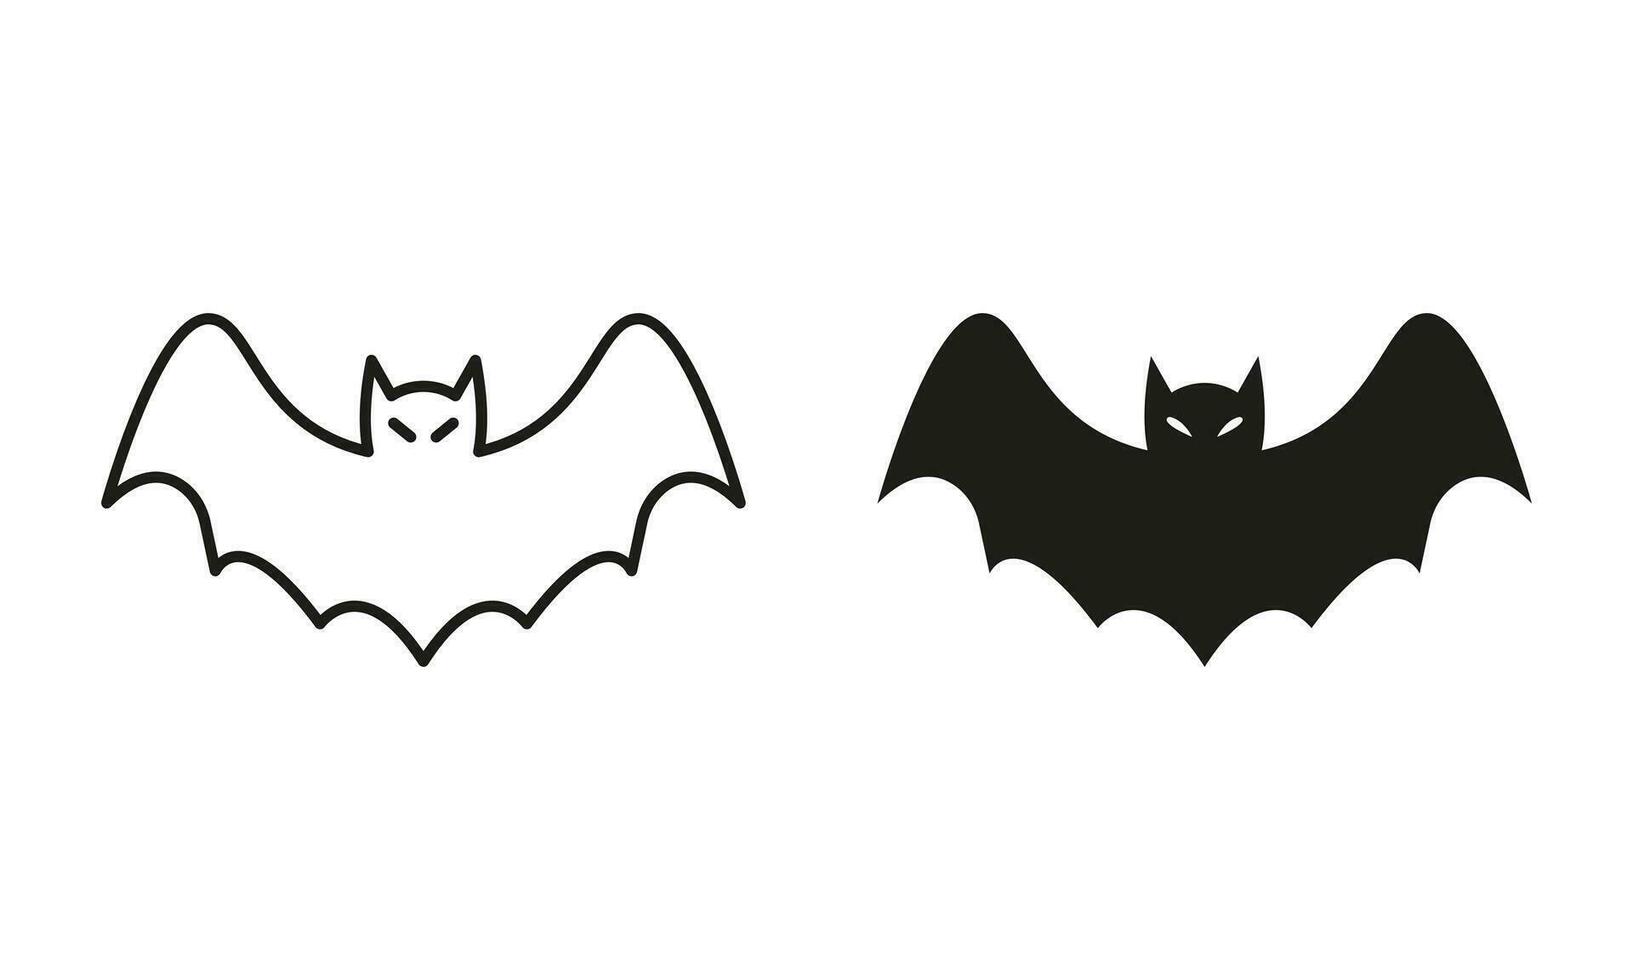 Bat Line and Silhouette Black Icon Set. Cute Halloween Spooky Fly Vampire with Wings at Night Pictogram. Scary Evil, Dark Bat Symbol Collection on White Background. Isolated Vector Illustration.